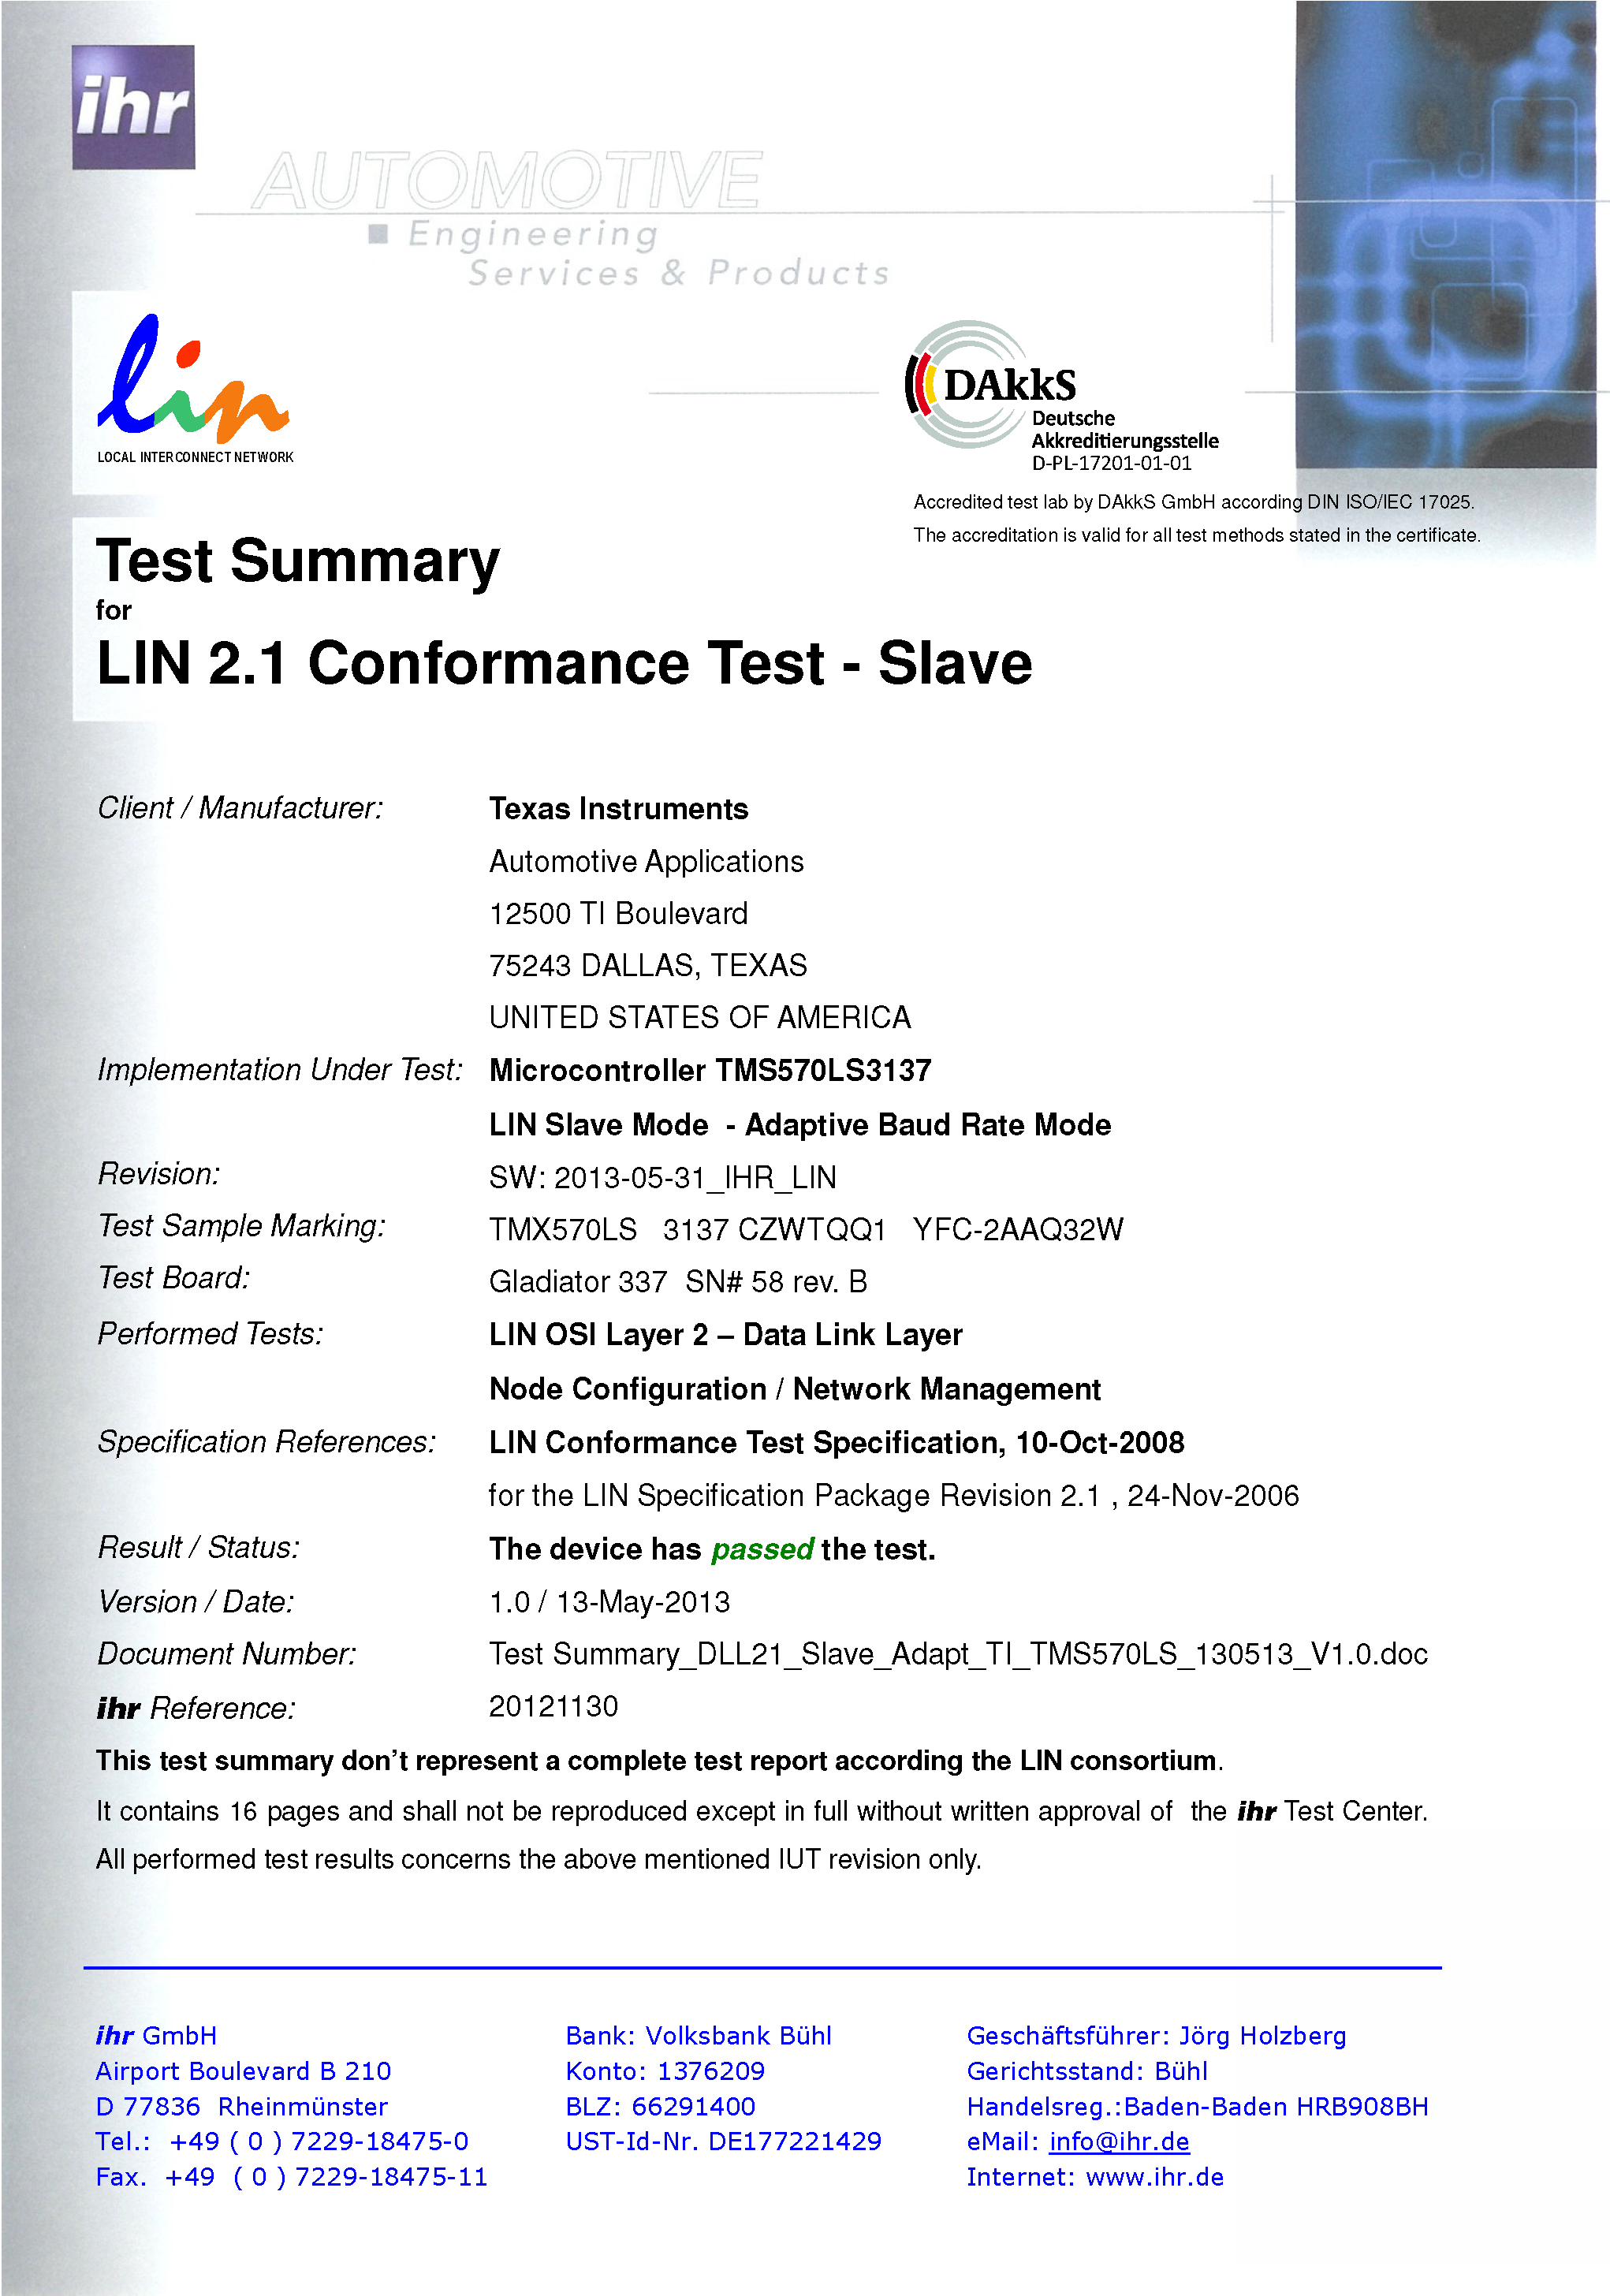 RM41L232 new_LIN_Certification_Slave_Adapt.png